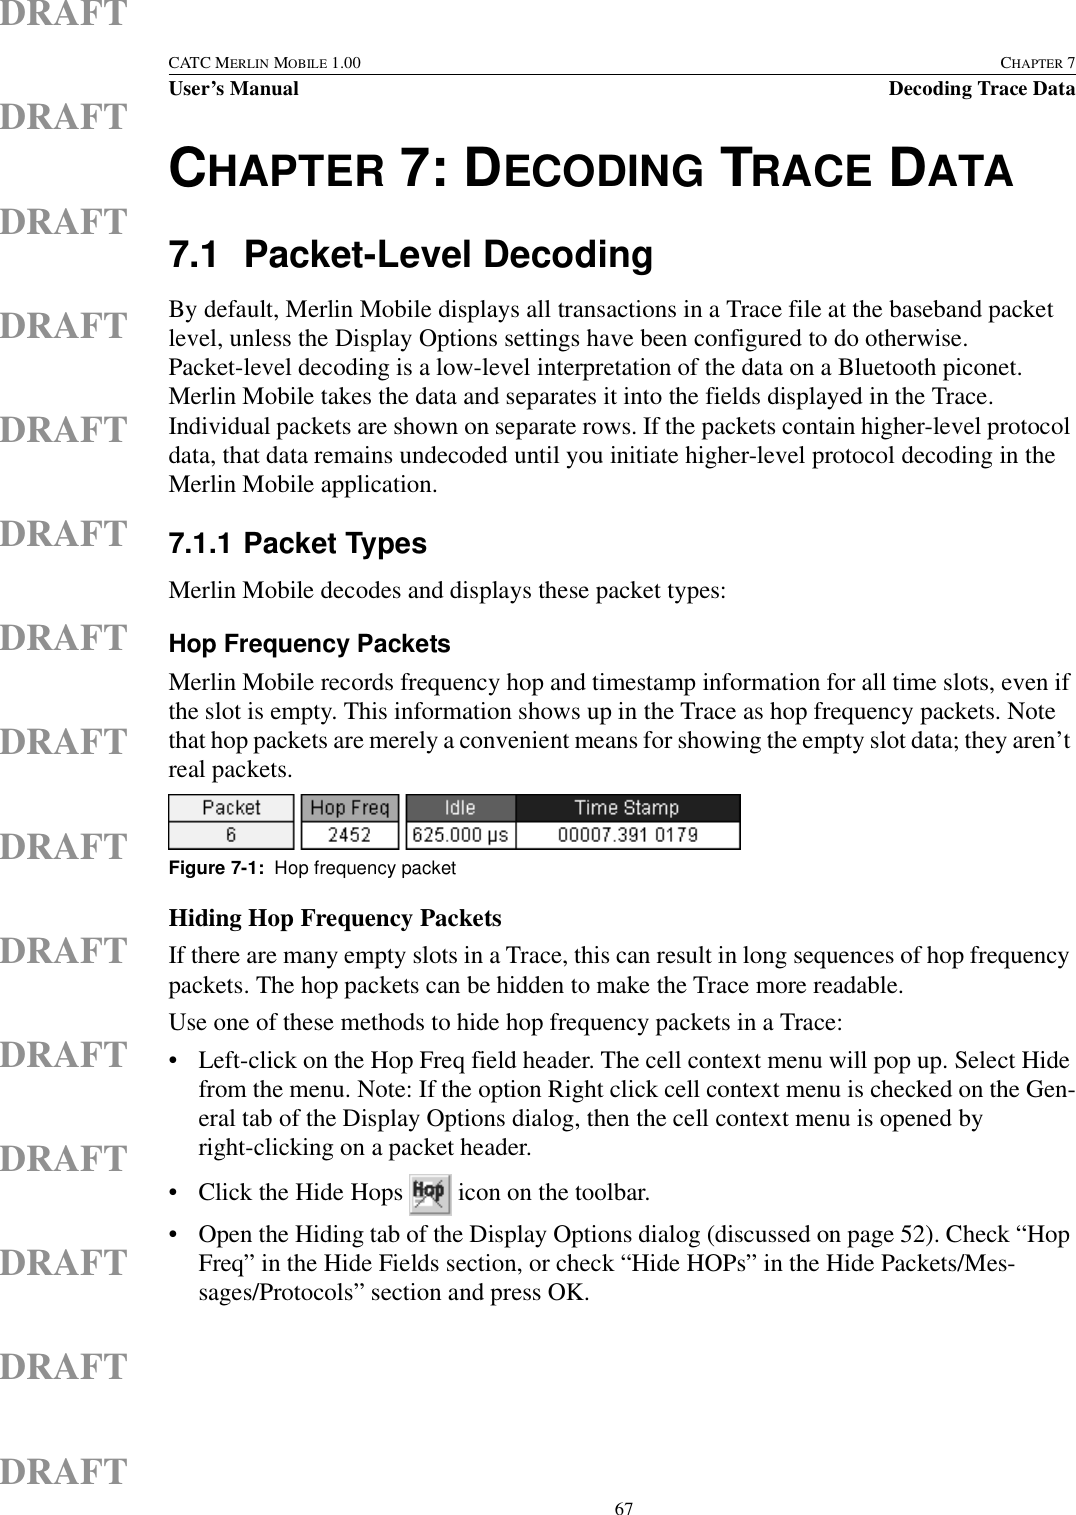  67CATC MERLIN MOBILE 1.00 CHAPTER 7User’s Manual Decoding Trace DataDRAFTDRAFTDRAFTDRAFTDRAFTDRAFTDRAFTDRAFTDRAFTDRAFTDRAFTDRAFTDRAFTDRAFTDRAFTCHAPTER 7: DECODING TRACE DATA7.1 Packet-Level DecodingBy default, Merlin Mobile displays all transactions in a Trace file at the baseband packet level, unless the Display Options settings have been configured to do otherwise. Packet-level decoding is a low-level interpretation of the data on a Bluetooth piconet. Merlin Mobile takes the data and separates it into the fields displayed in the Trace. Individual packets are shown on separate rows. If the packets contain higher-level protocol data, that data remains undecoded until you initiate higher-level protocol decoding in the Merlin Mobile application.7.1.1 Packet TypesMerlin Mobile decodes and displays these packet types:Hop Frequency PacketsMerlin Mobile records frequency hop and timestamp information for all time slots, even if the slot is empty. This information shows up in the Trace as hop frequency packets. Note that hop packets are merely a convenient means for showing the empty slot data; they aren’t real packets.Hiding Hop Frequency PacketsIf there are many empty slots in a Trace, this can result in long sequences of hop frequency packets. The hop packets can be hidden to make the Trace more readable.Use one of these methods to hide hop frequency packets in a Trace:• Left-click on the Hop Freq field header. The cell context menu will pop up. Select Hide from the menu. Note: If the option Right click cell context menu is checked on the Gen-eral tab of the Display Options dialog, then the cell context menu is opened by right-clicking on a packet header.• Click the Hide Hops   icon on the toolbar.• Open the Hiding tab of the Display Options dialog (discussed on page 52). Check “Hop Freq” in the Hide Fields section, or check “Hide HOPs” in the Hide Packets/Mes-sages/Protocols” section and press OK.Figure 7-1:  Hop frequency packet